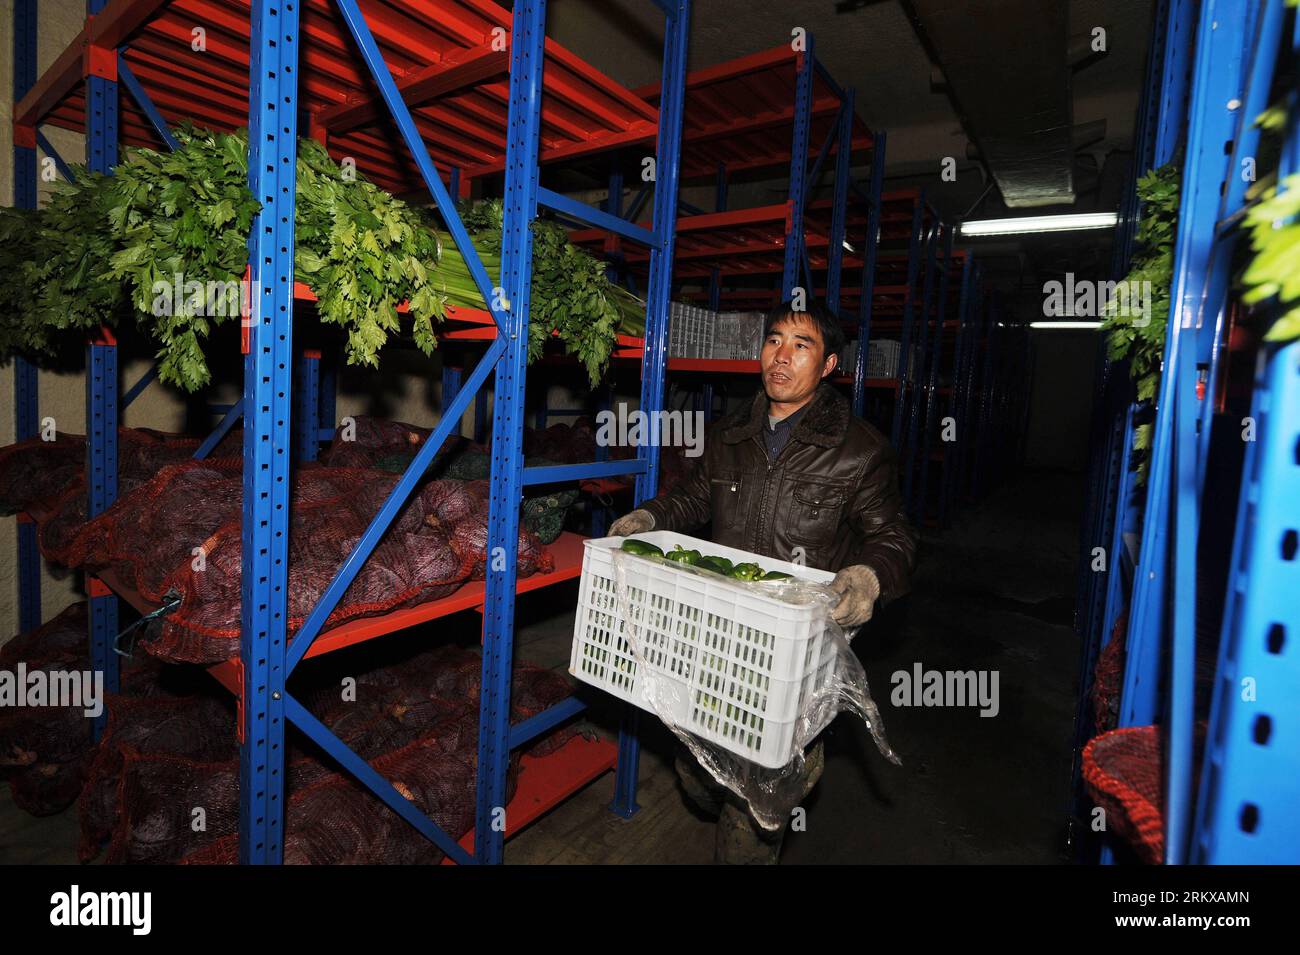 Bildnummer: 58929369  Datum: 11.12.2012  Copyright: imago/Xinhua TAIYUAN, Dec. 11, 2012 - A villager carries a box of fresh vegetable for sale in Jingadao Village of Changzhi County, north China s Shanxi Province, Dec. 11, 2012. Jingadao Village of Changzhi County has formed a recycling economy. Villagers here use marsh gas as fuel after fermenting pig excrement, adopt clean sewage disposal system, produce natural fertilizer with animal excrement and plant green vegetables. (Xinhua/Yan Yan) (lfj) SHANXI-CHANGZHI-ENVIRONMENTAL FRIENDLY VILLAGE (CN) PUBLICATIONxNOTxINxCHN Wirtschaft Landwirtscha Stock Photo